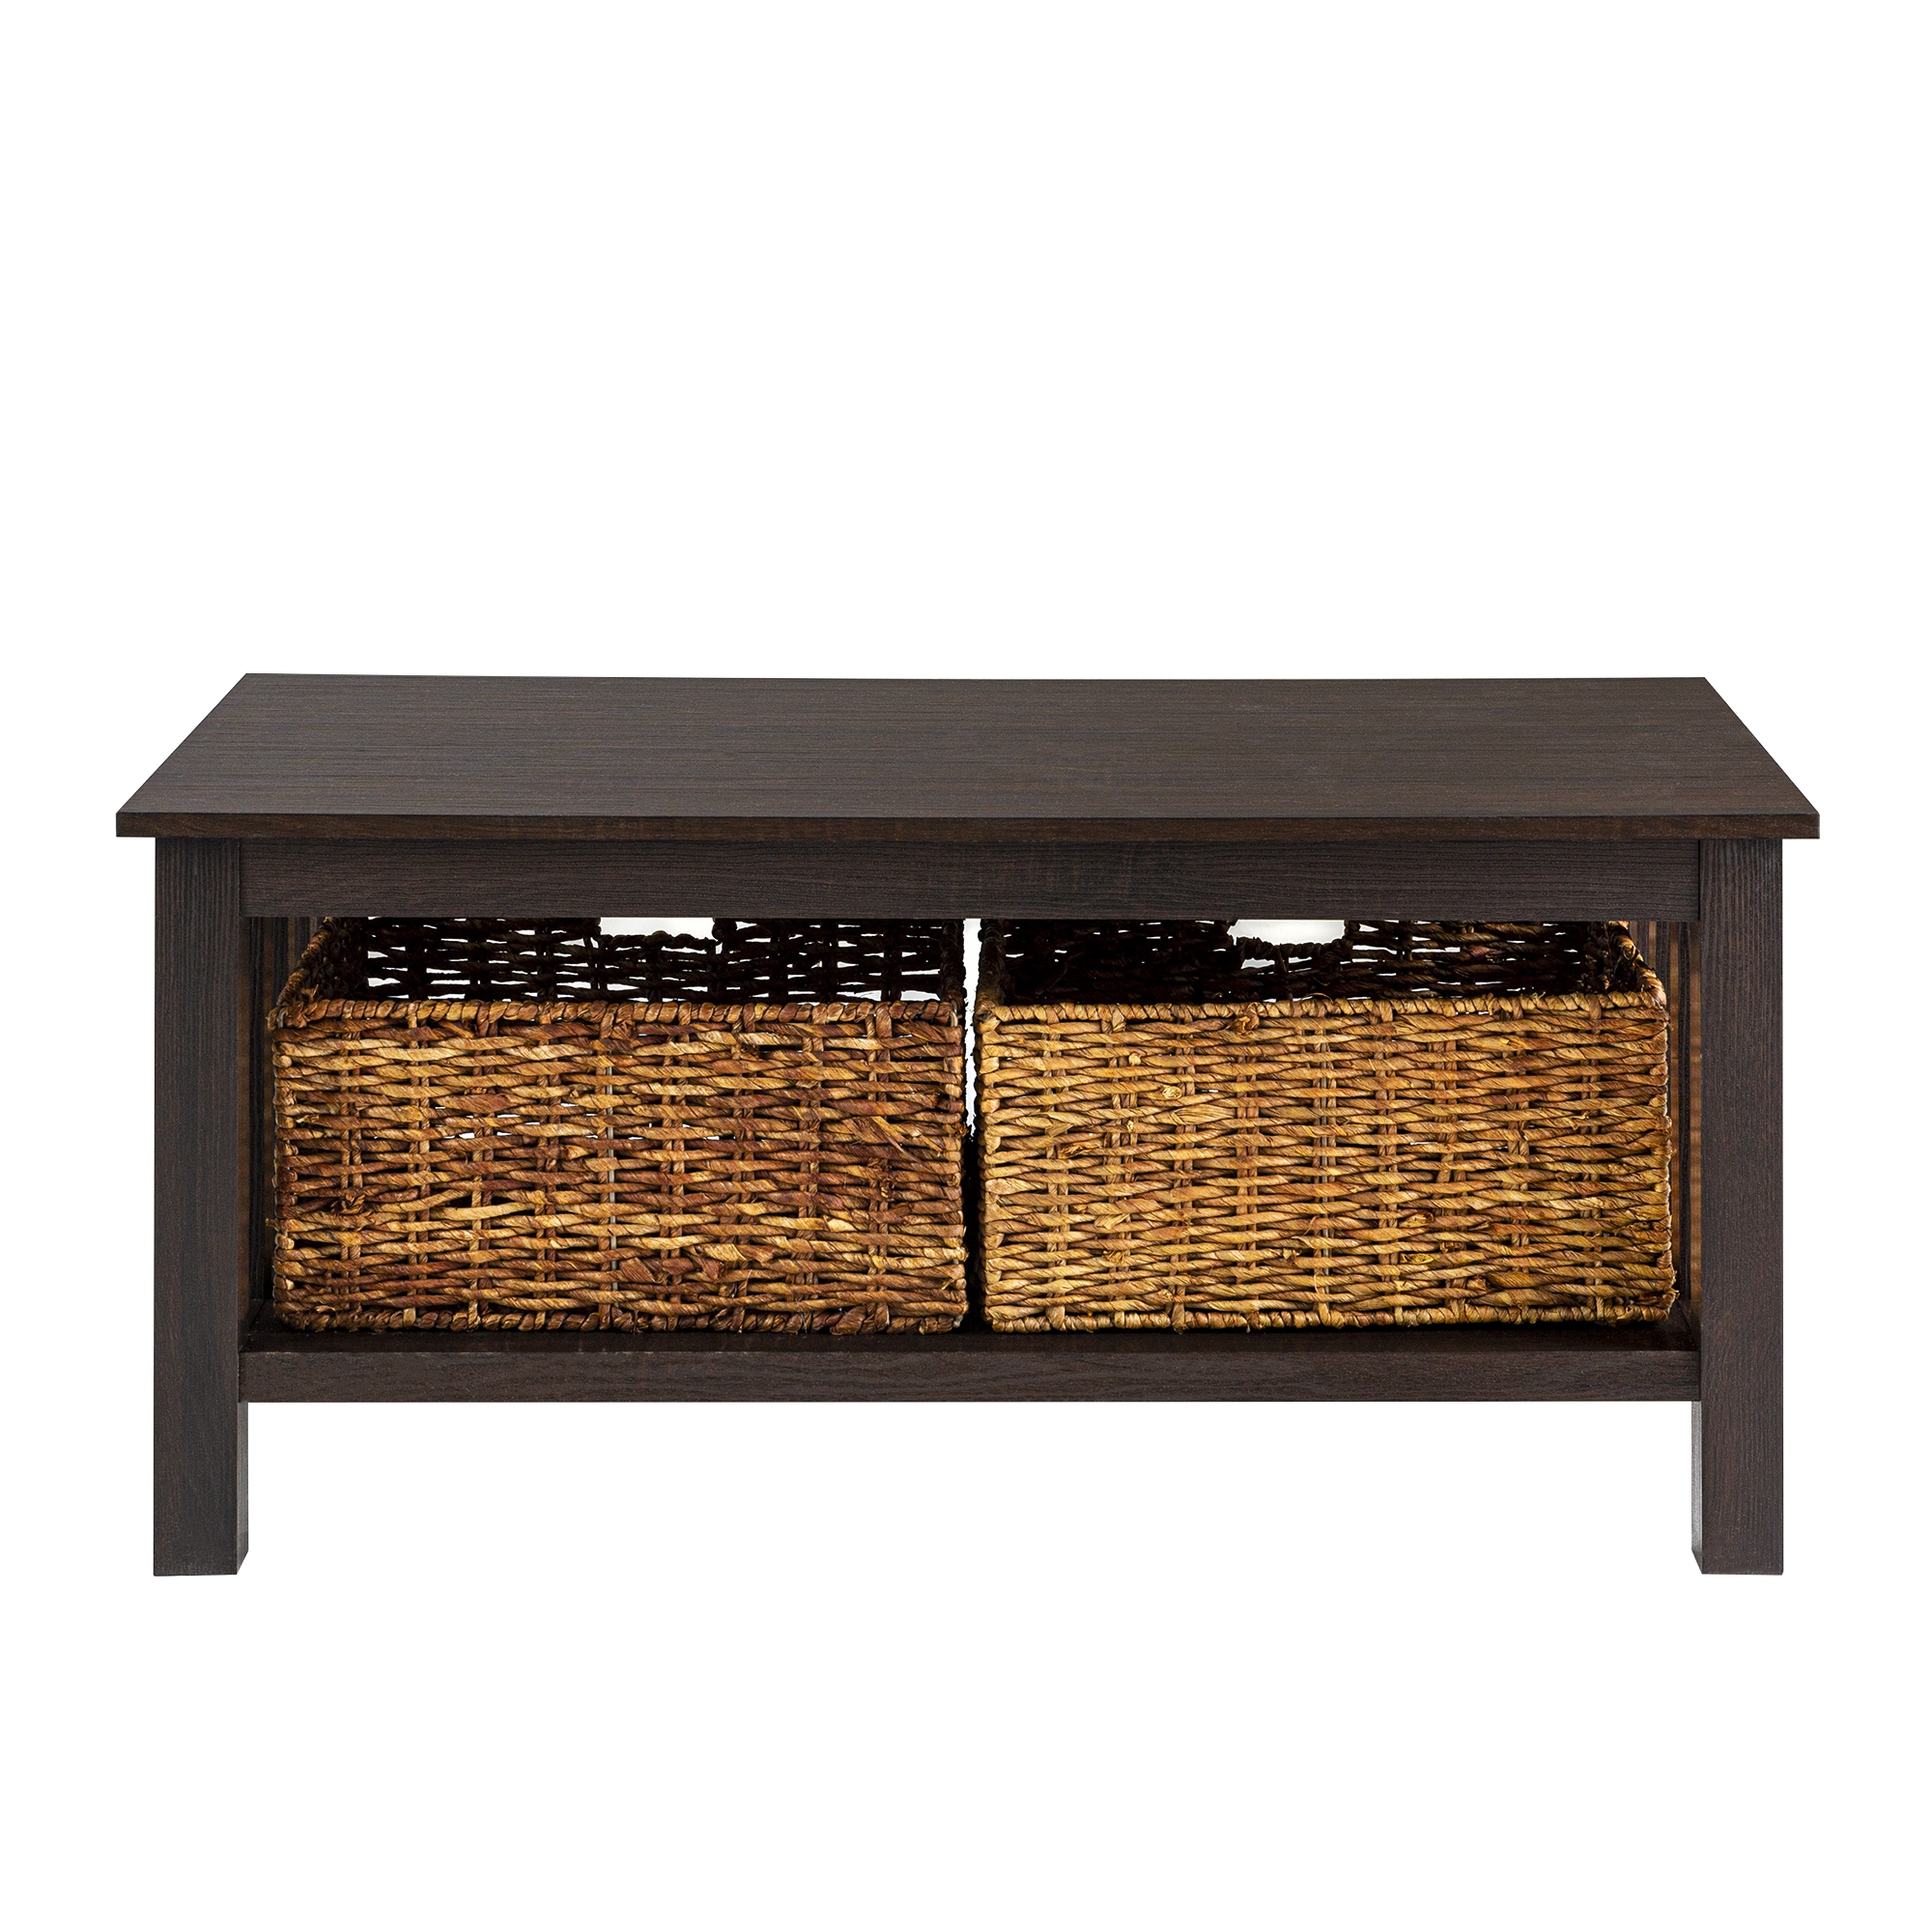 Mission Storage Coffee Table with Baskets - Espresso - Image 3